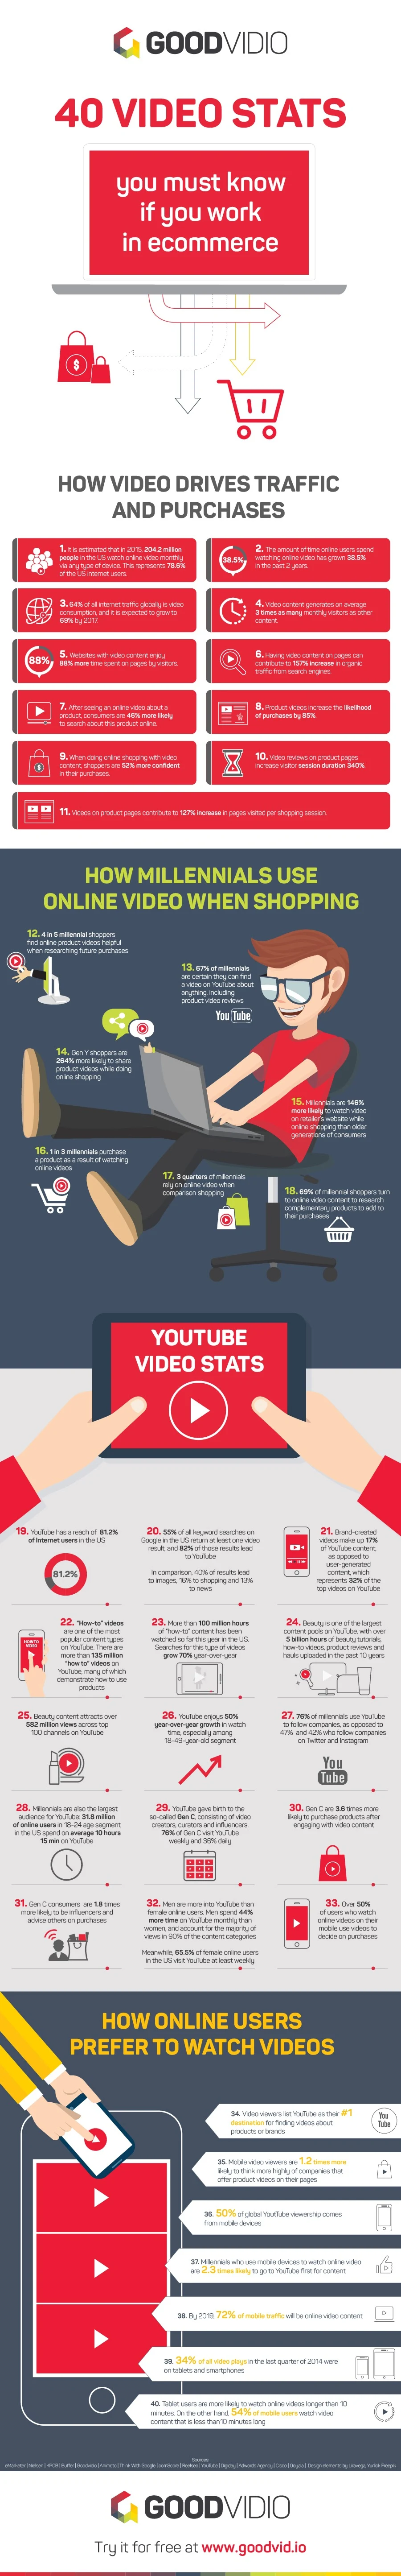 40 Video Stats You Must Know if You Work in eCommerce - #Infographic